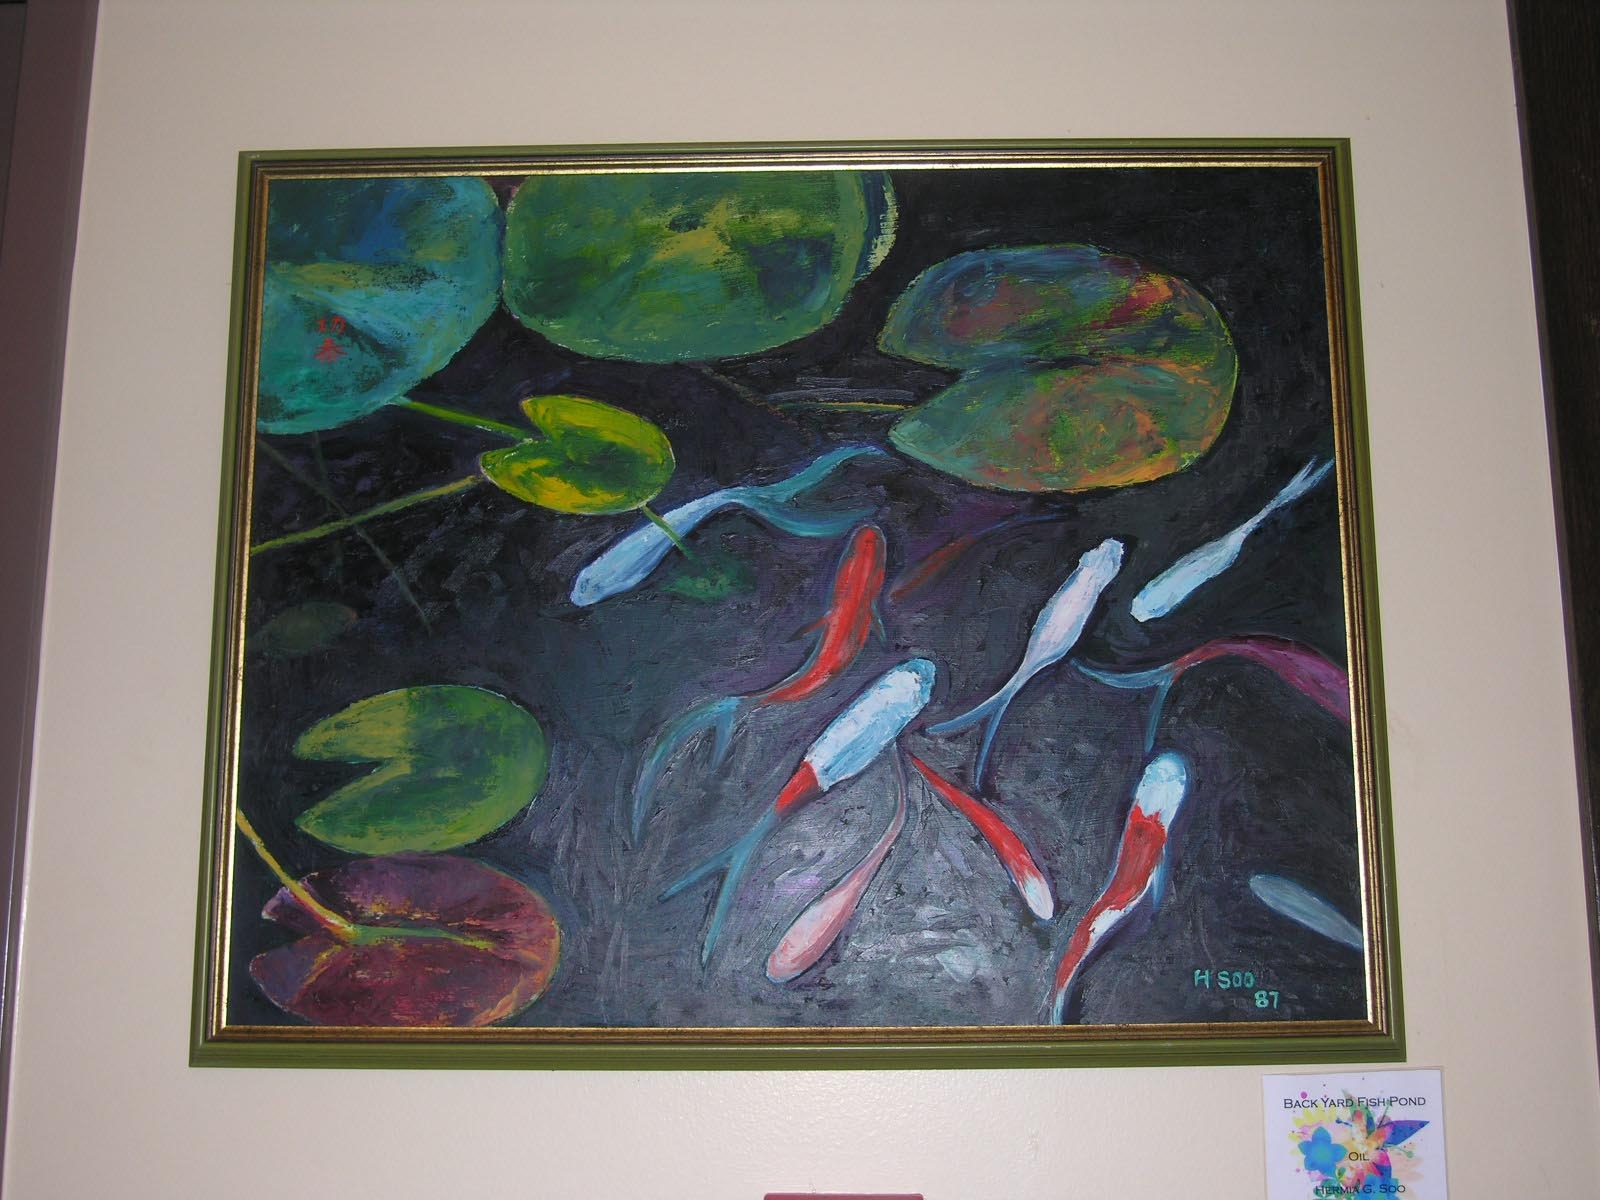 Painting of overhead view of koi fish and lilly pads in pond